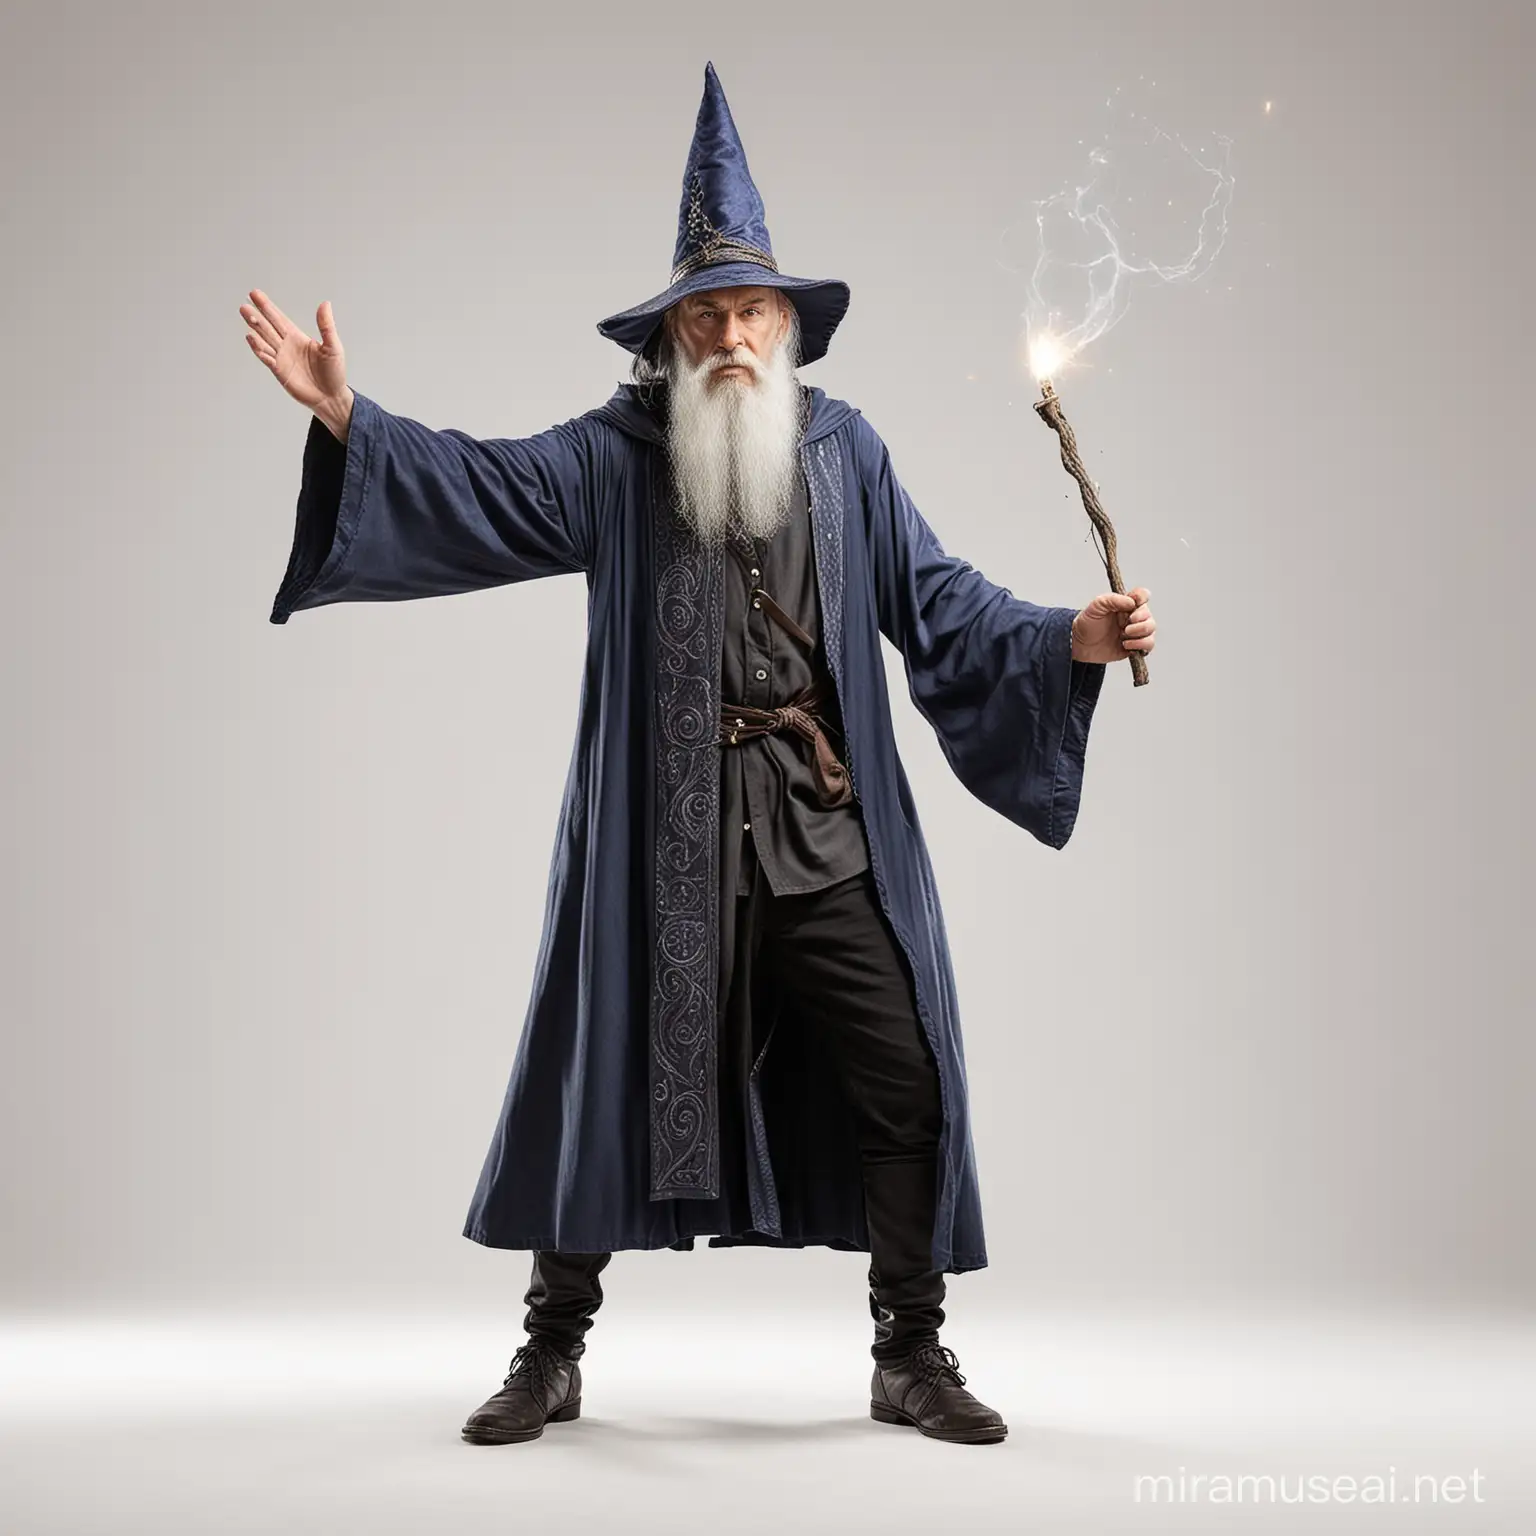 Male Wizard Casting Spell on White Background